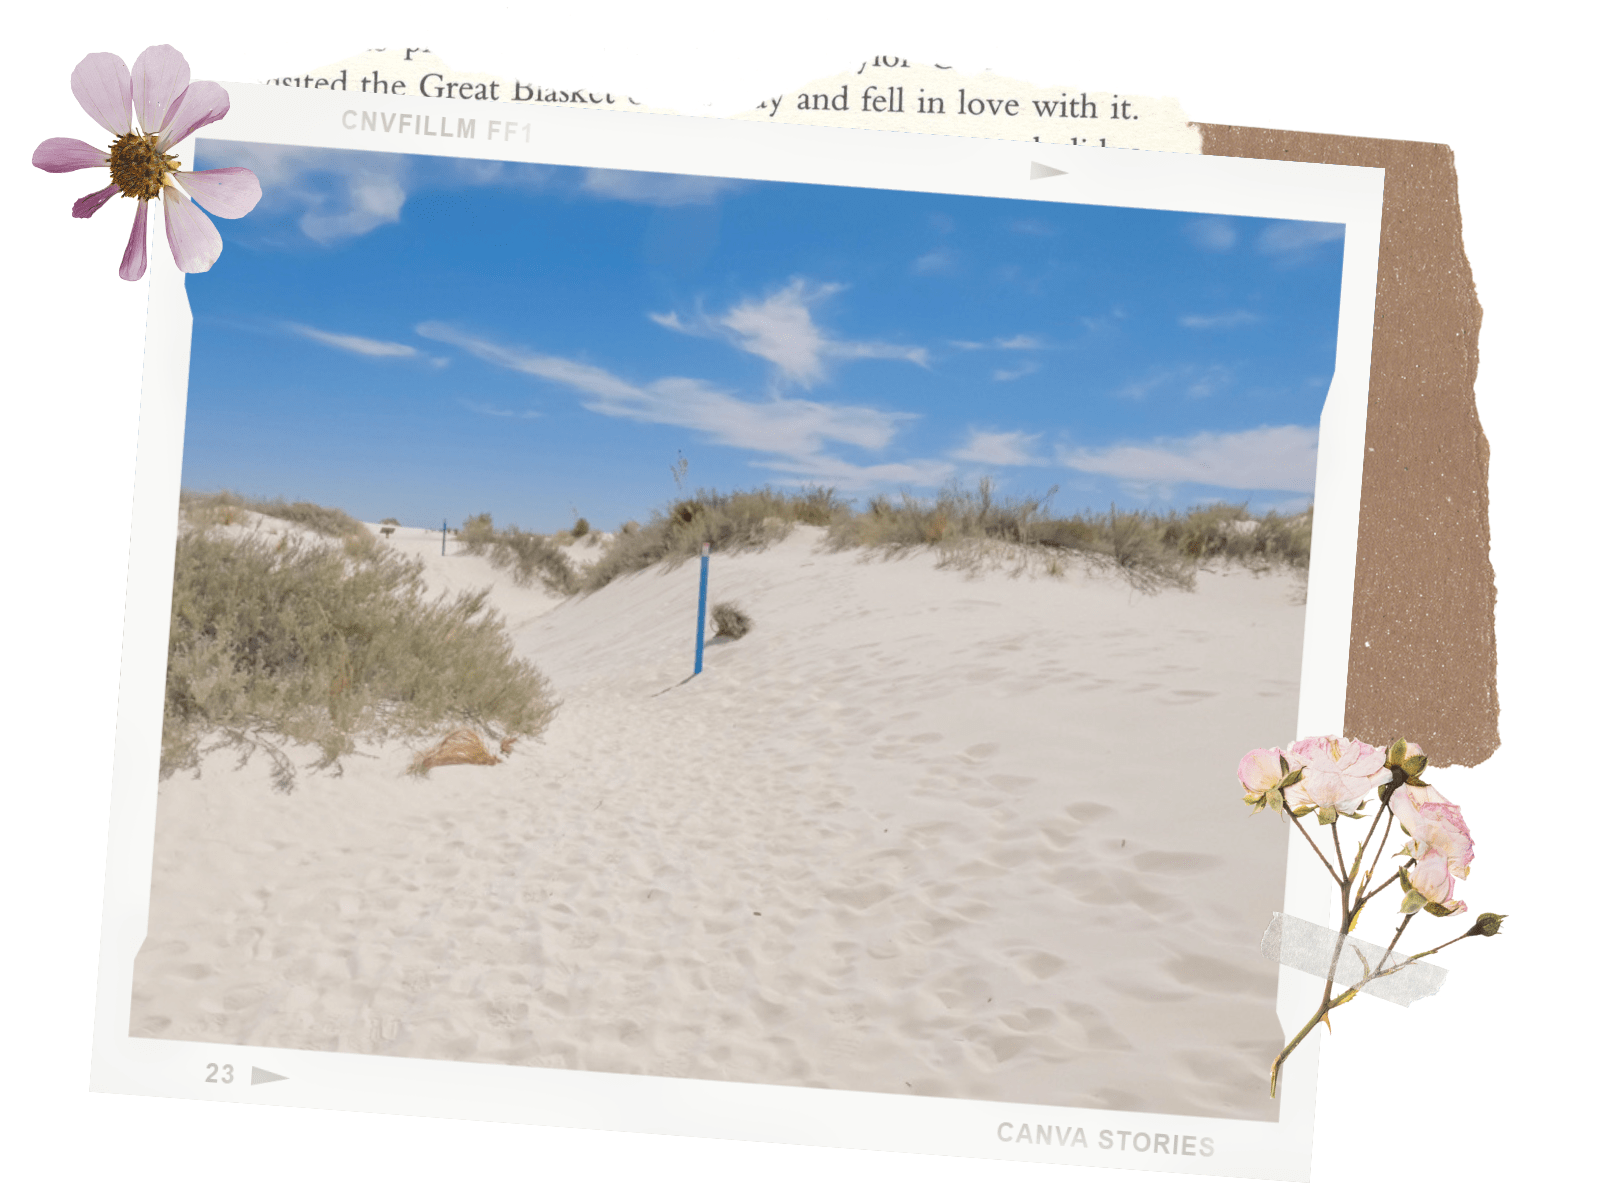 White Sands National Park in New Mexico: Dune Life Nature Trail